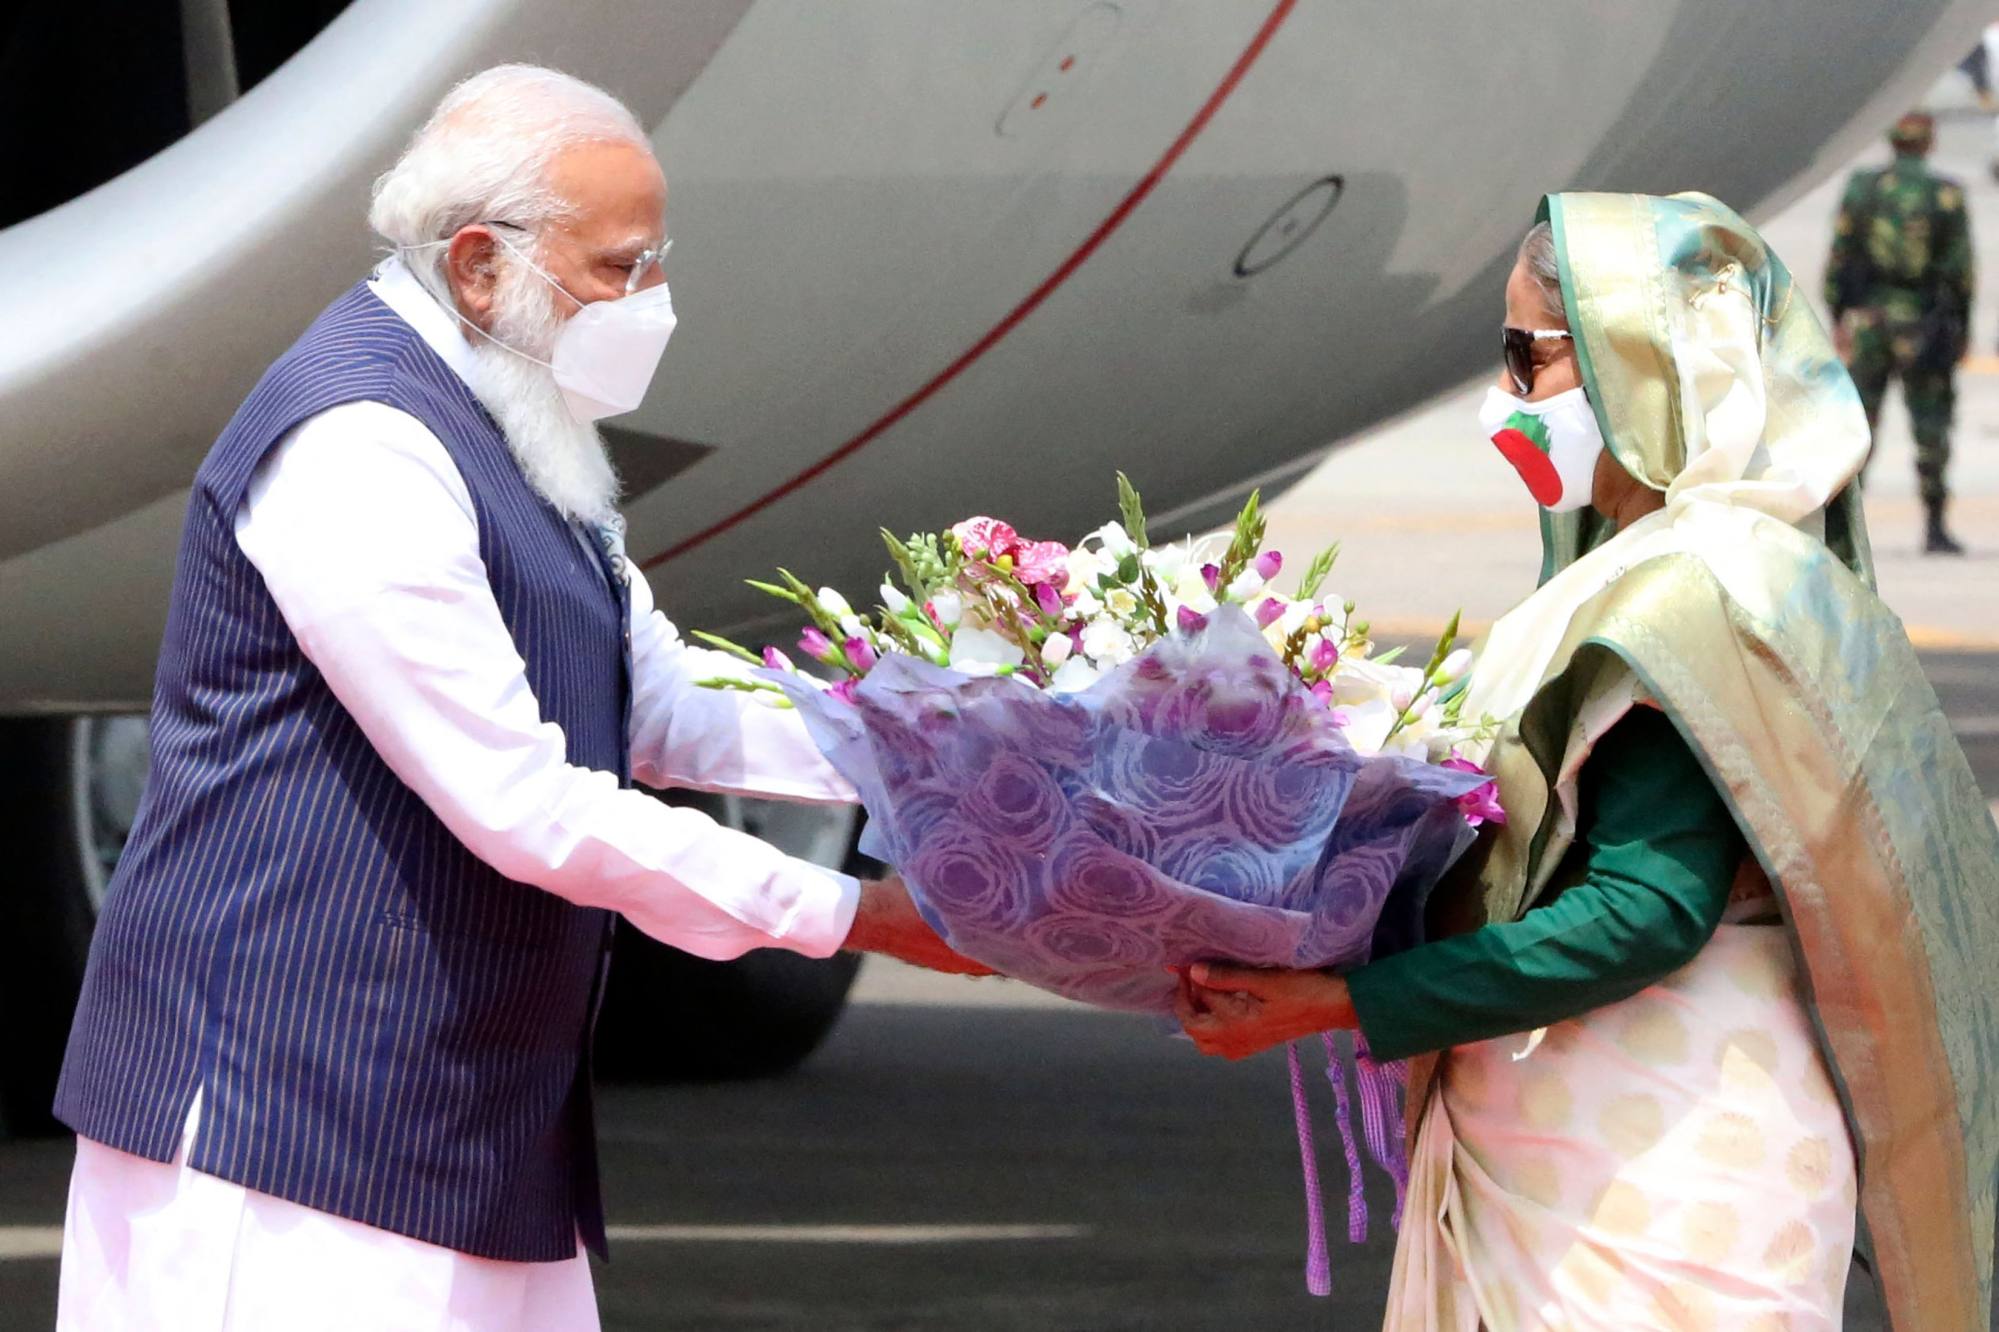 Bangladeshi Prime Minister Sheikh Hasina (right) greets her Indian counterpart, Prime Minister Narendra Modi, in Dhaka on March 26, 2021. The South Asian leaders have formed a cordial personal bond. Photo: AFP